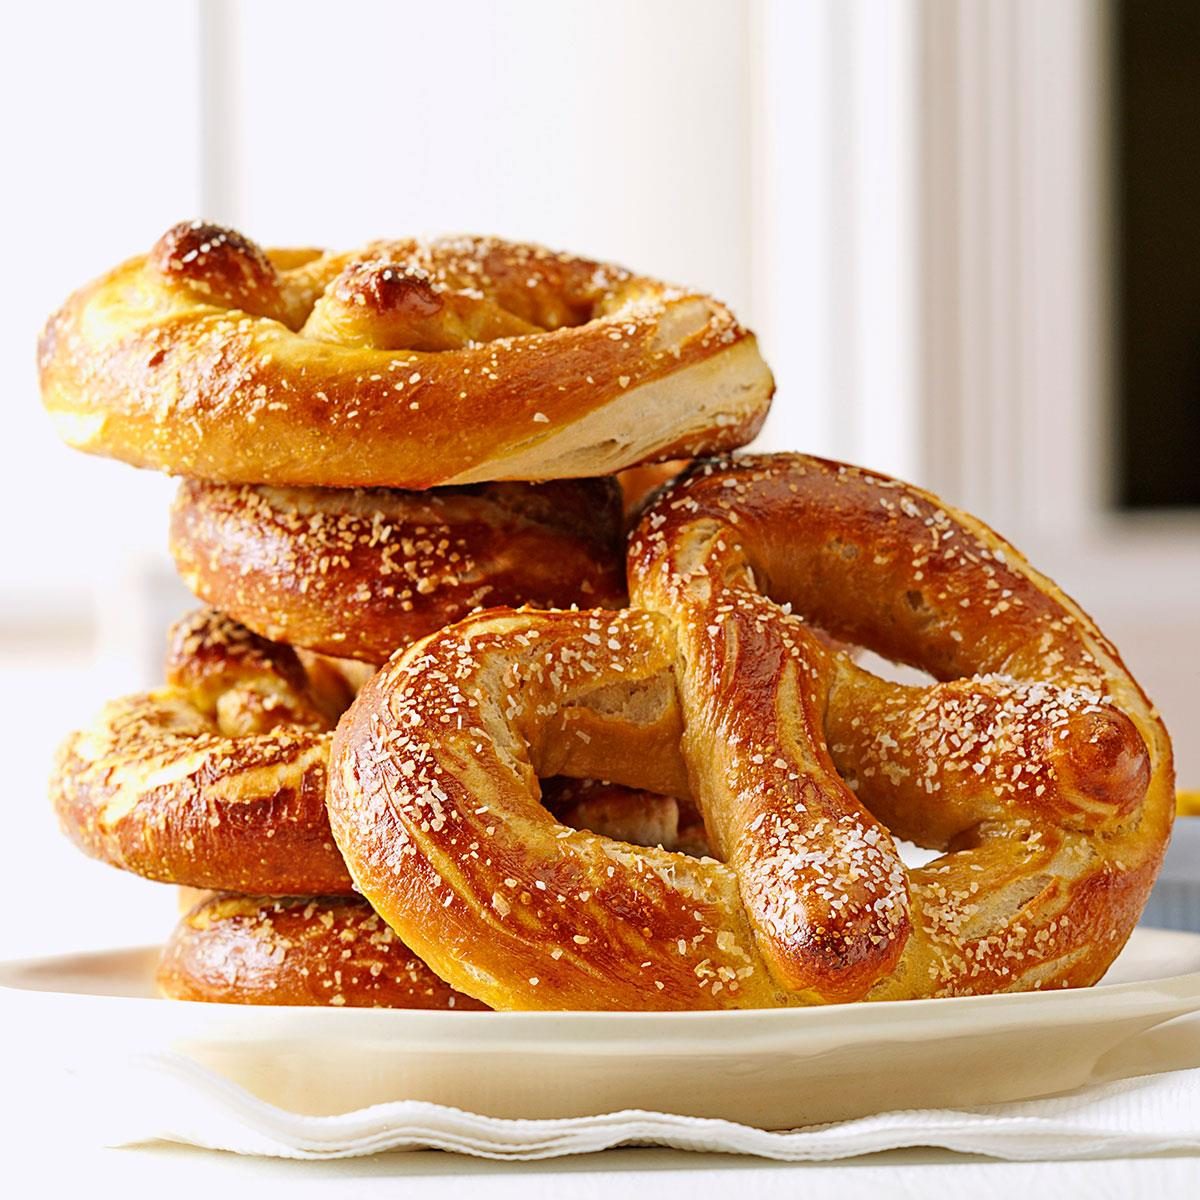 <p>I'm always looking for new ways to combine fun flavors, and what goes together better than beer and pretzels? Not much that I can think of. That’s why I put them together into one delicious recipe. —Alyssa Wilhite, Whitehouse, Texas</p> <div class="listicle-page__buttons"> <div class="listicle-page__cta-button"><a href='https://www.tasteofhome.com/recipes/soft-beer-pretzels/'>Go to Recipe</a></div> </div>